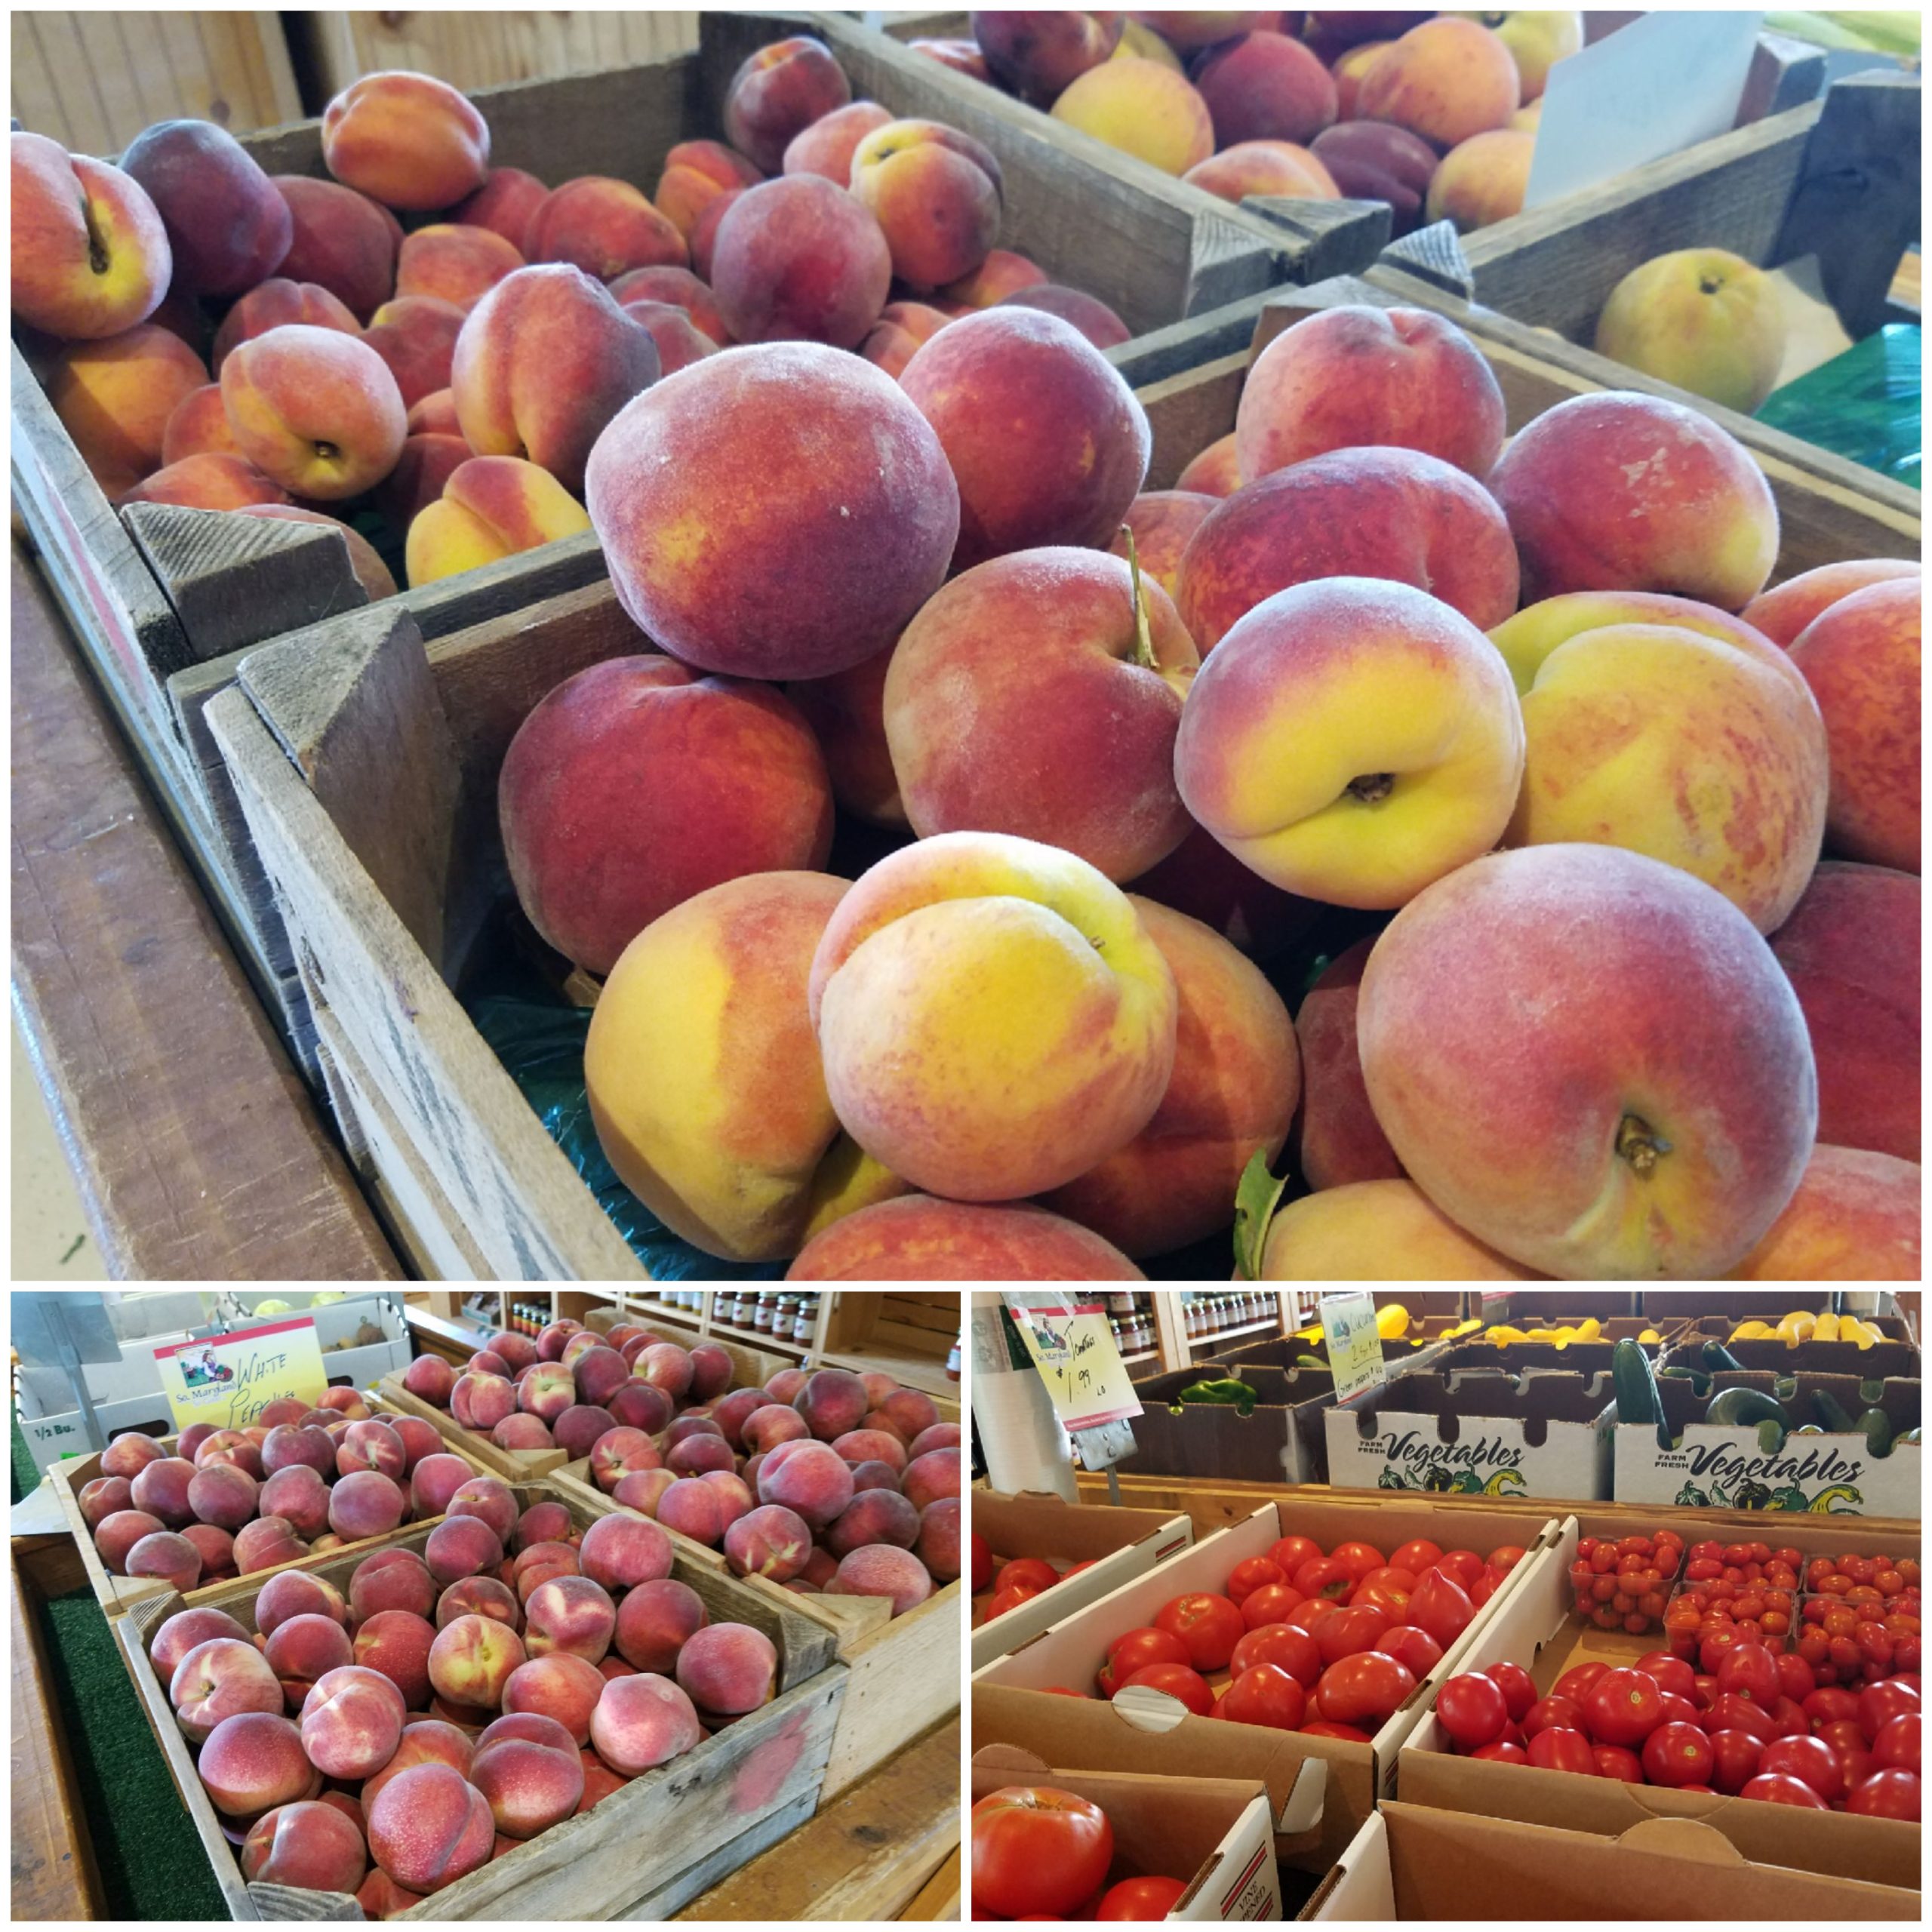 Peaches are here!